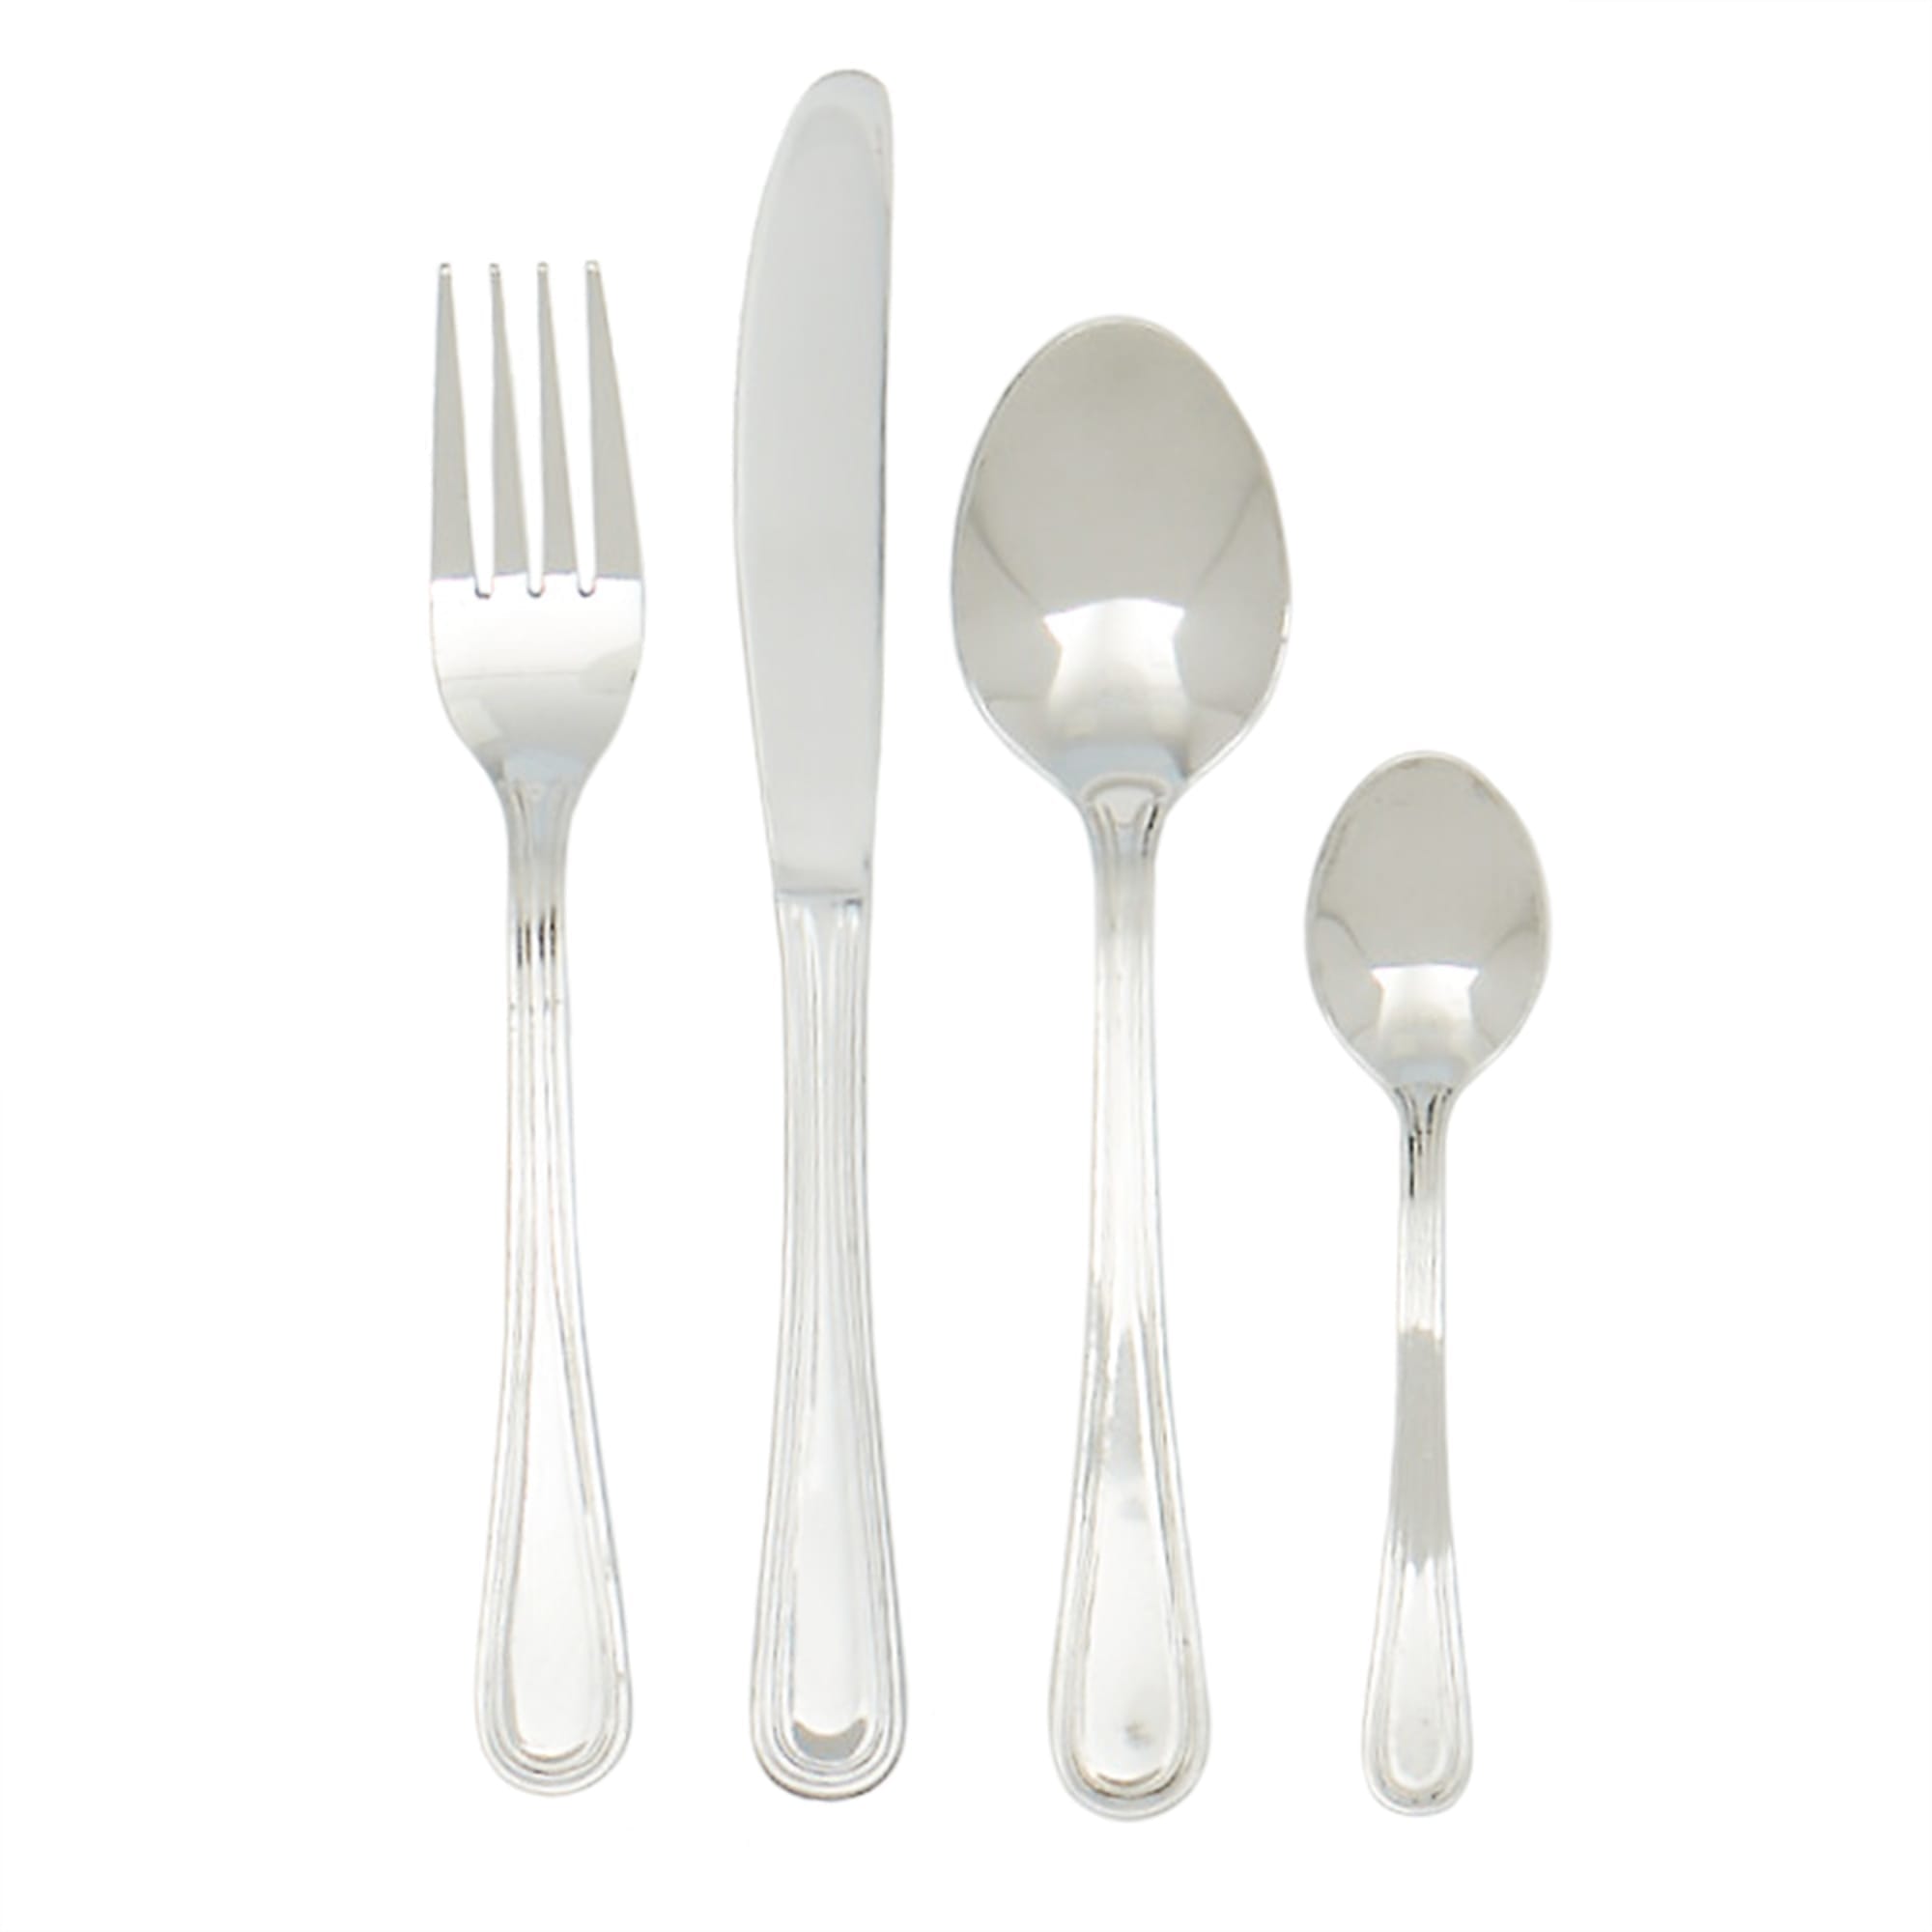 Home Basics Maya 16 Piece Stainless Steel Flatware Set, Silver $8.00 EACH, CASE PACK OF 12